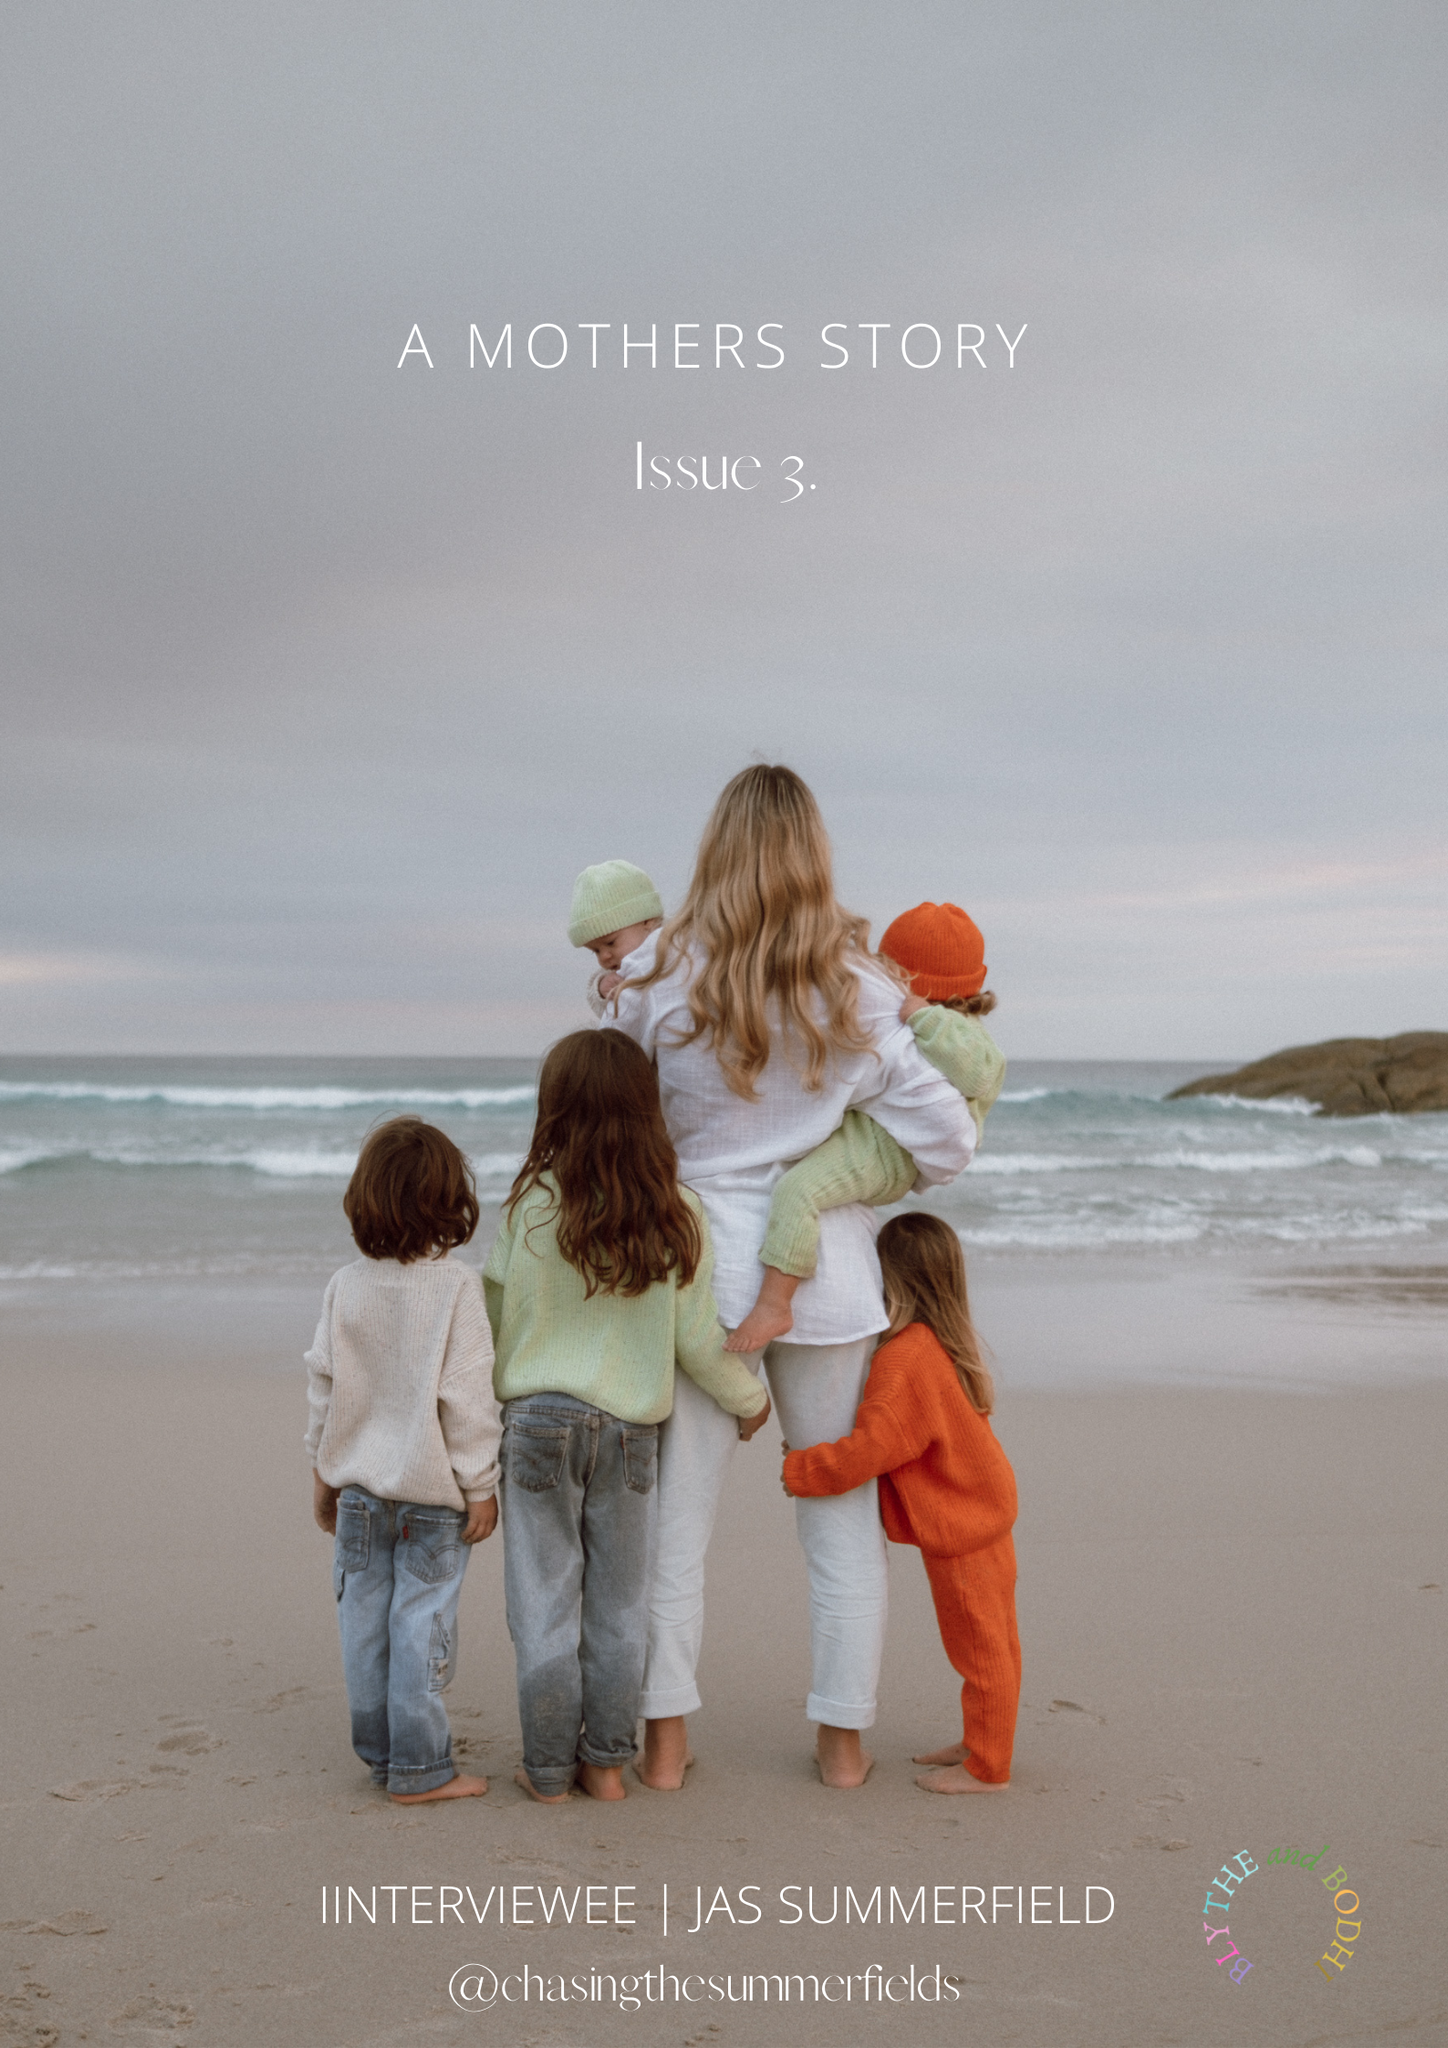 A Mothers Story| Issue 3